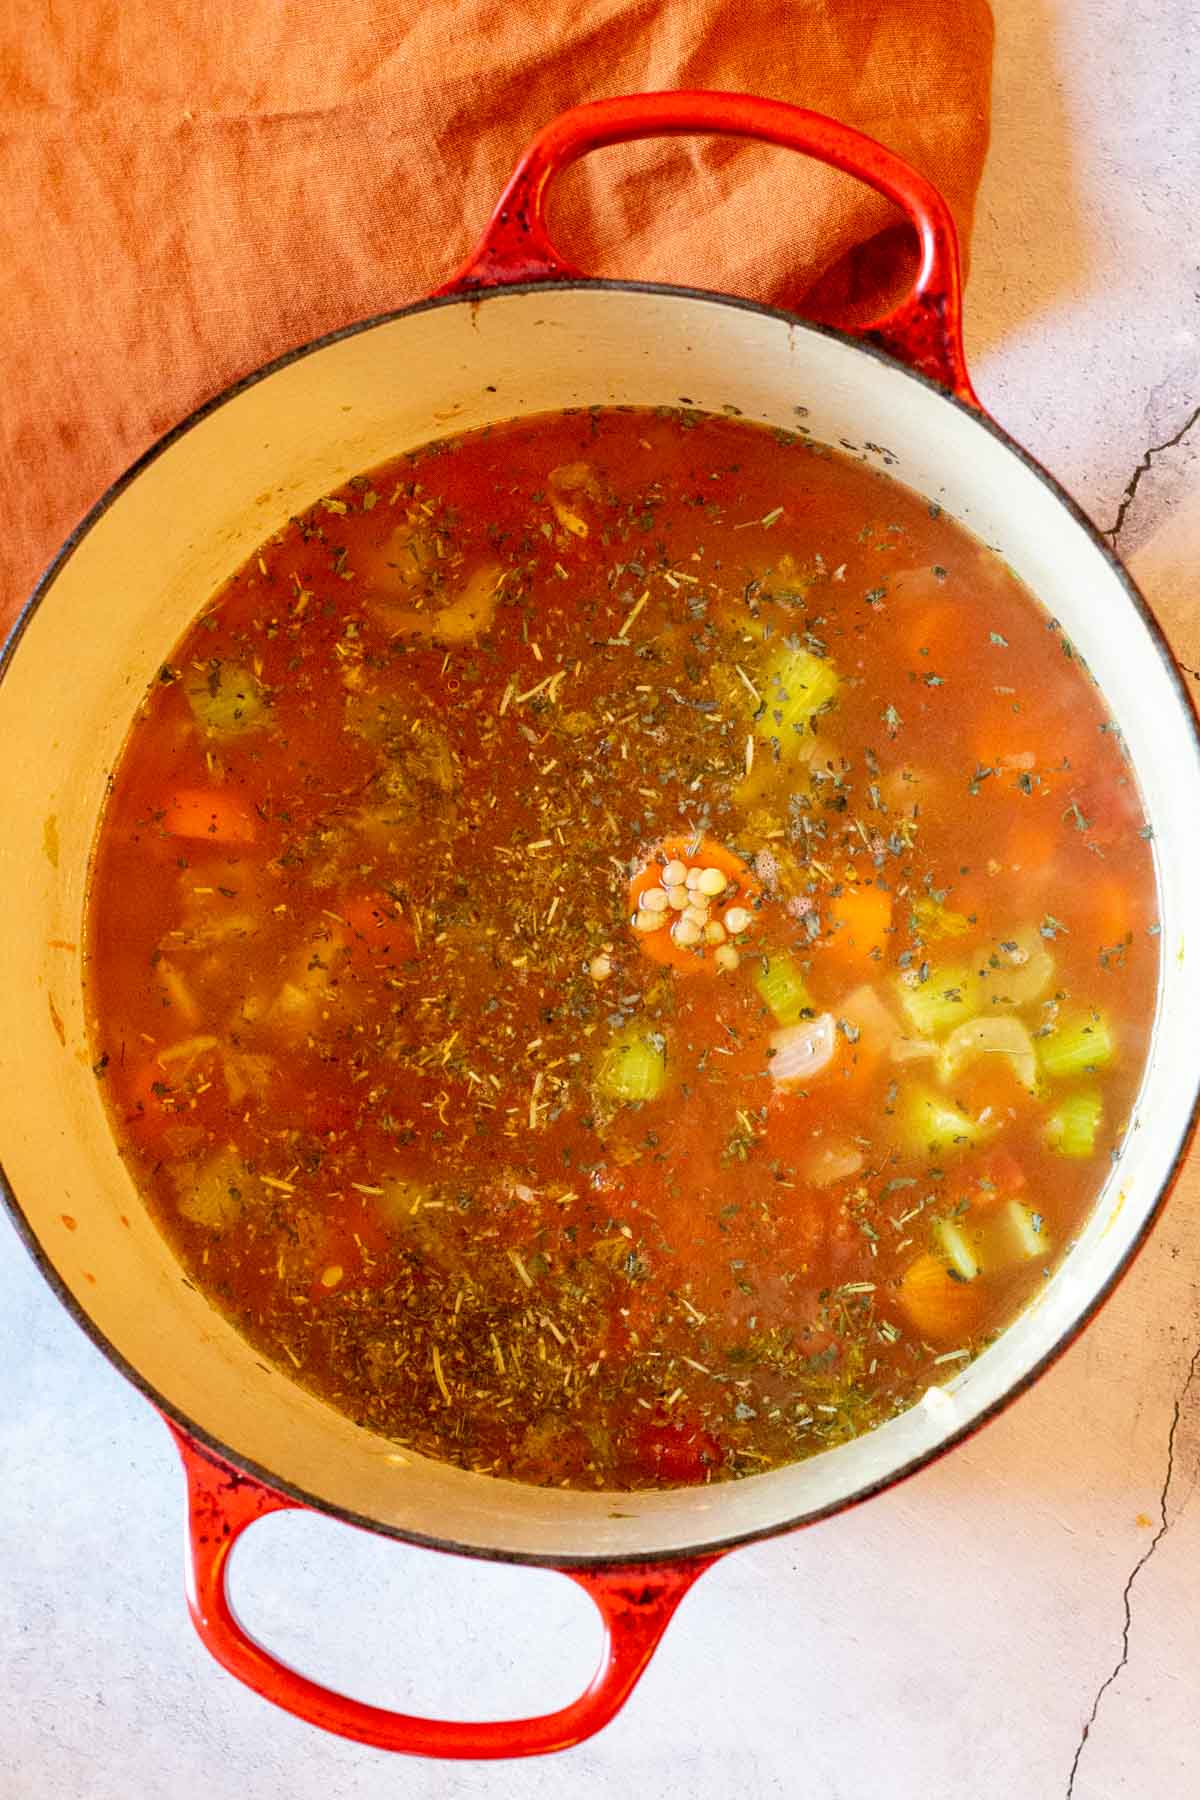 Adding broth to make lentil soup with turkey.